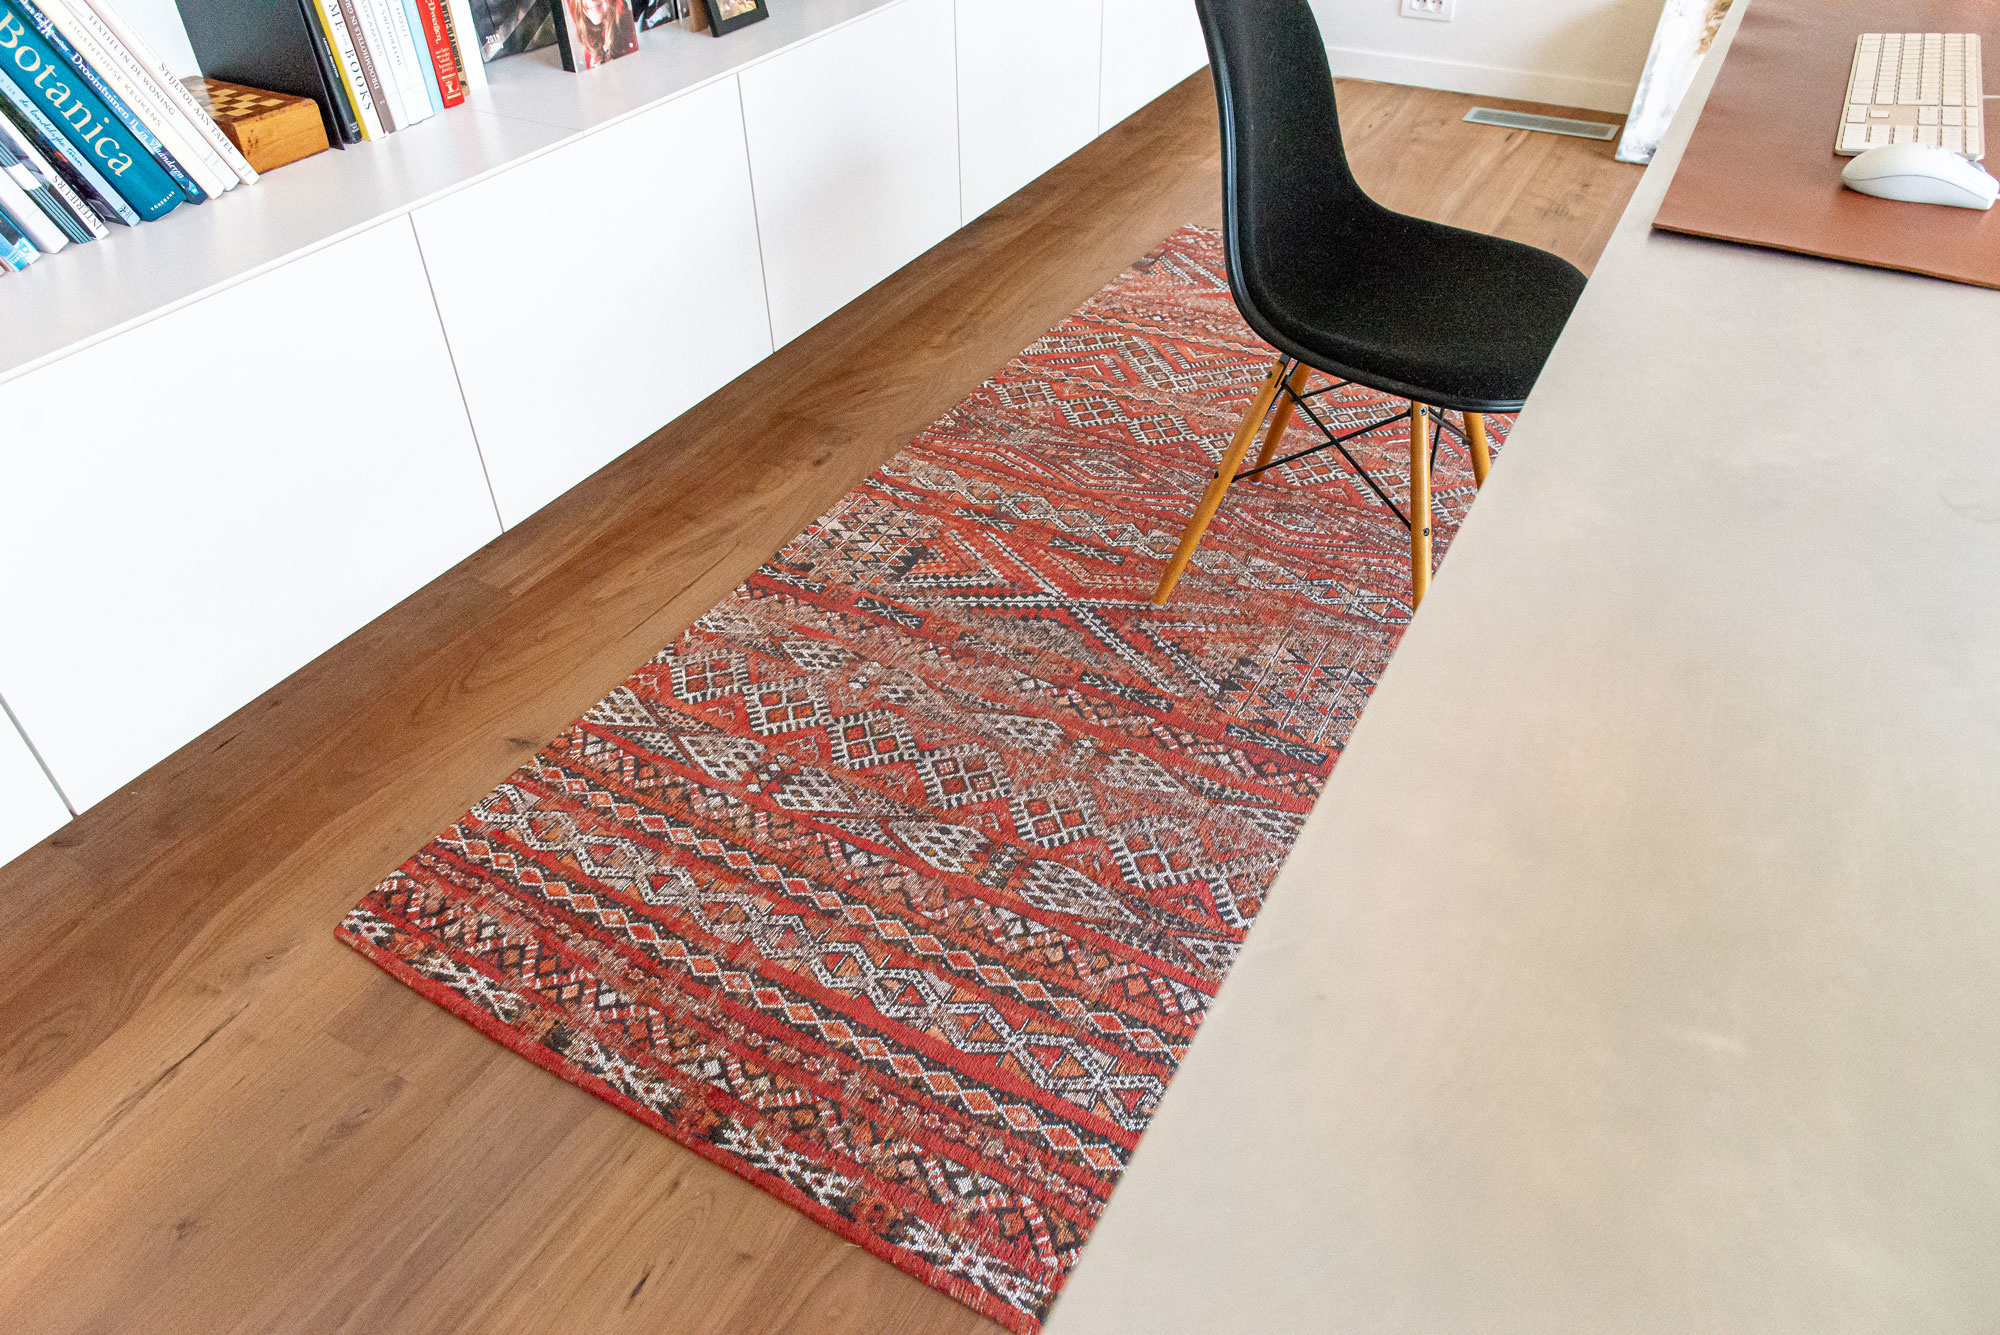 Antiquarian Flatwoven Red Rug ☞ Size: 9' 2" x 13' (280 x 390 cm)